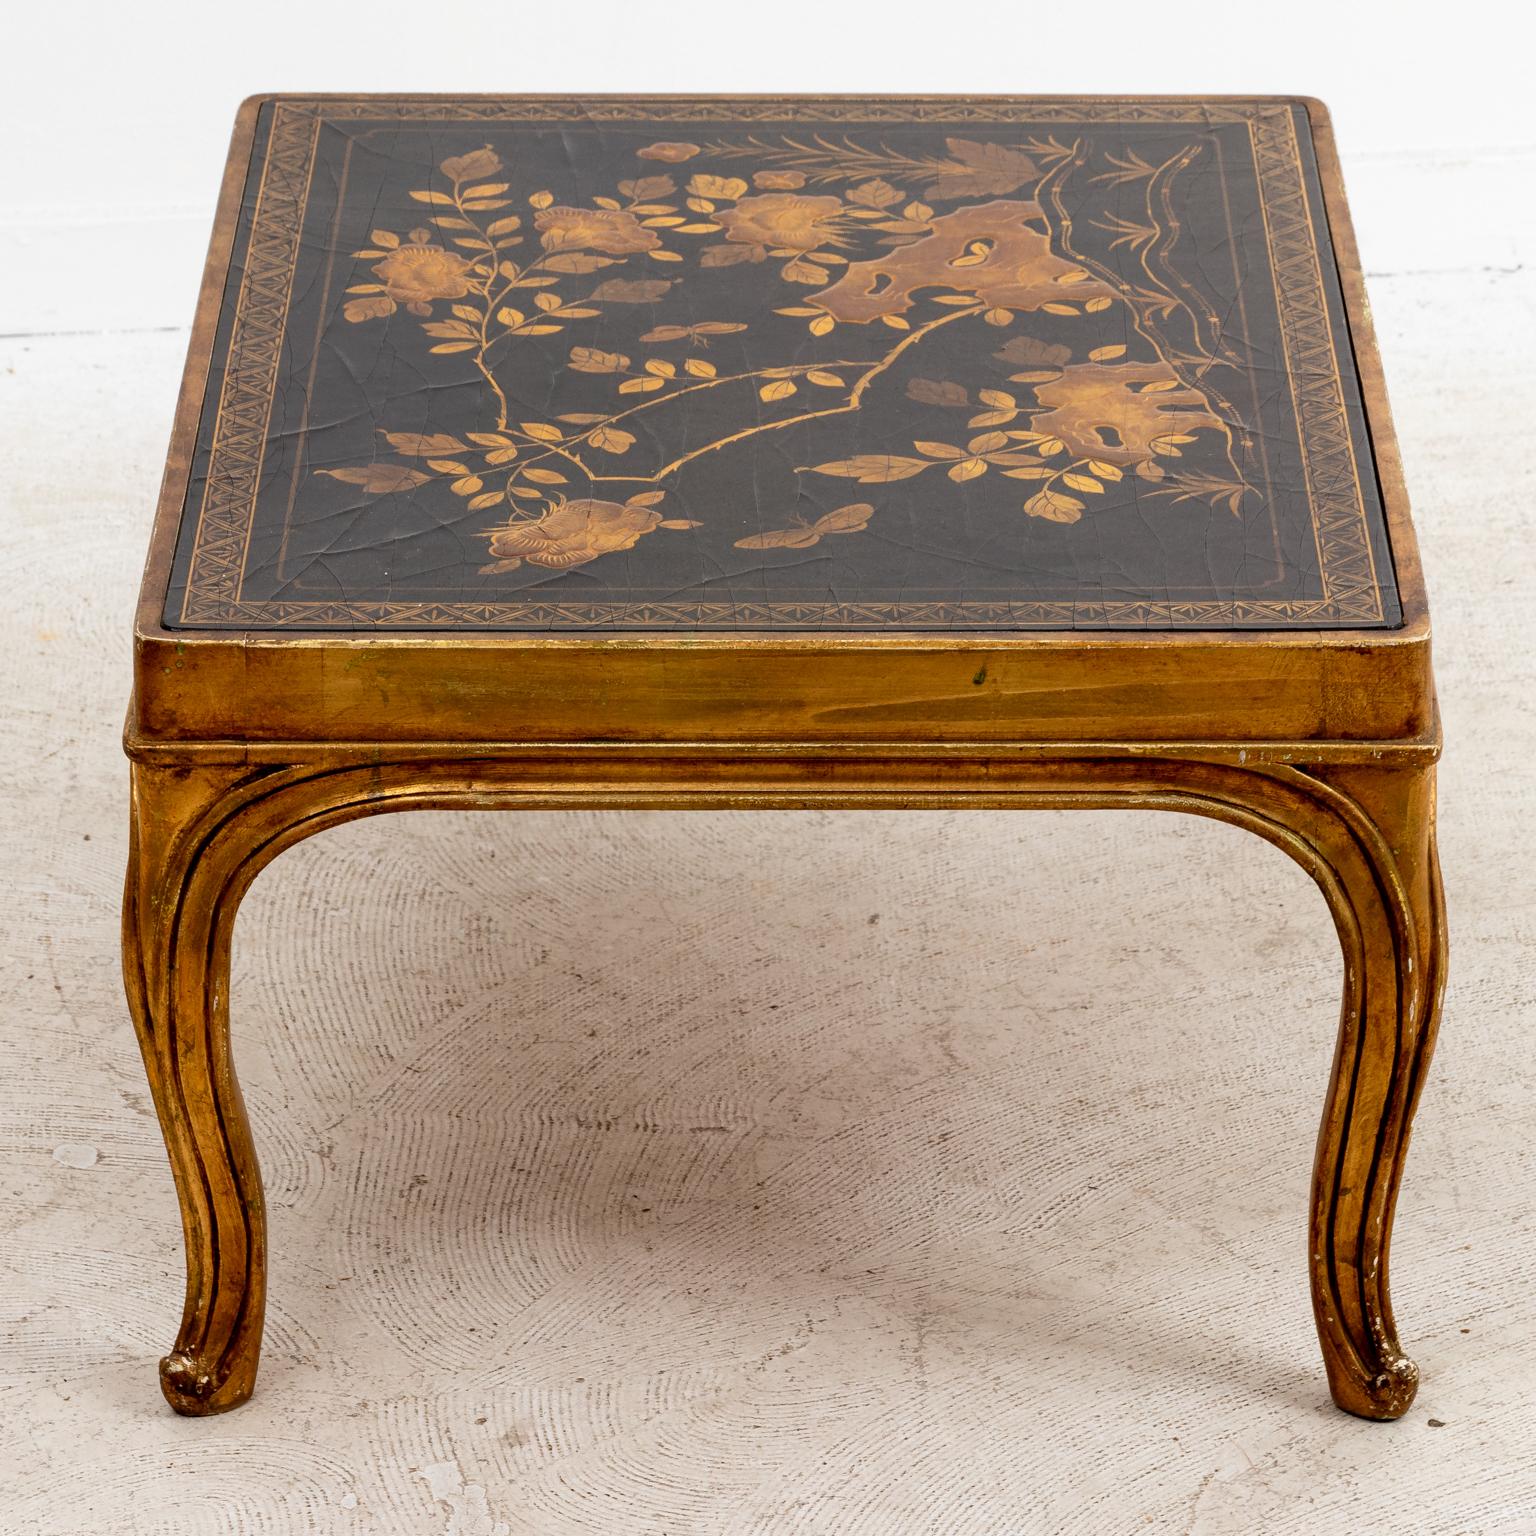 Chinese Export Chinese Lacquered Coffee Table with Floral Tabletop